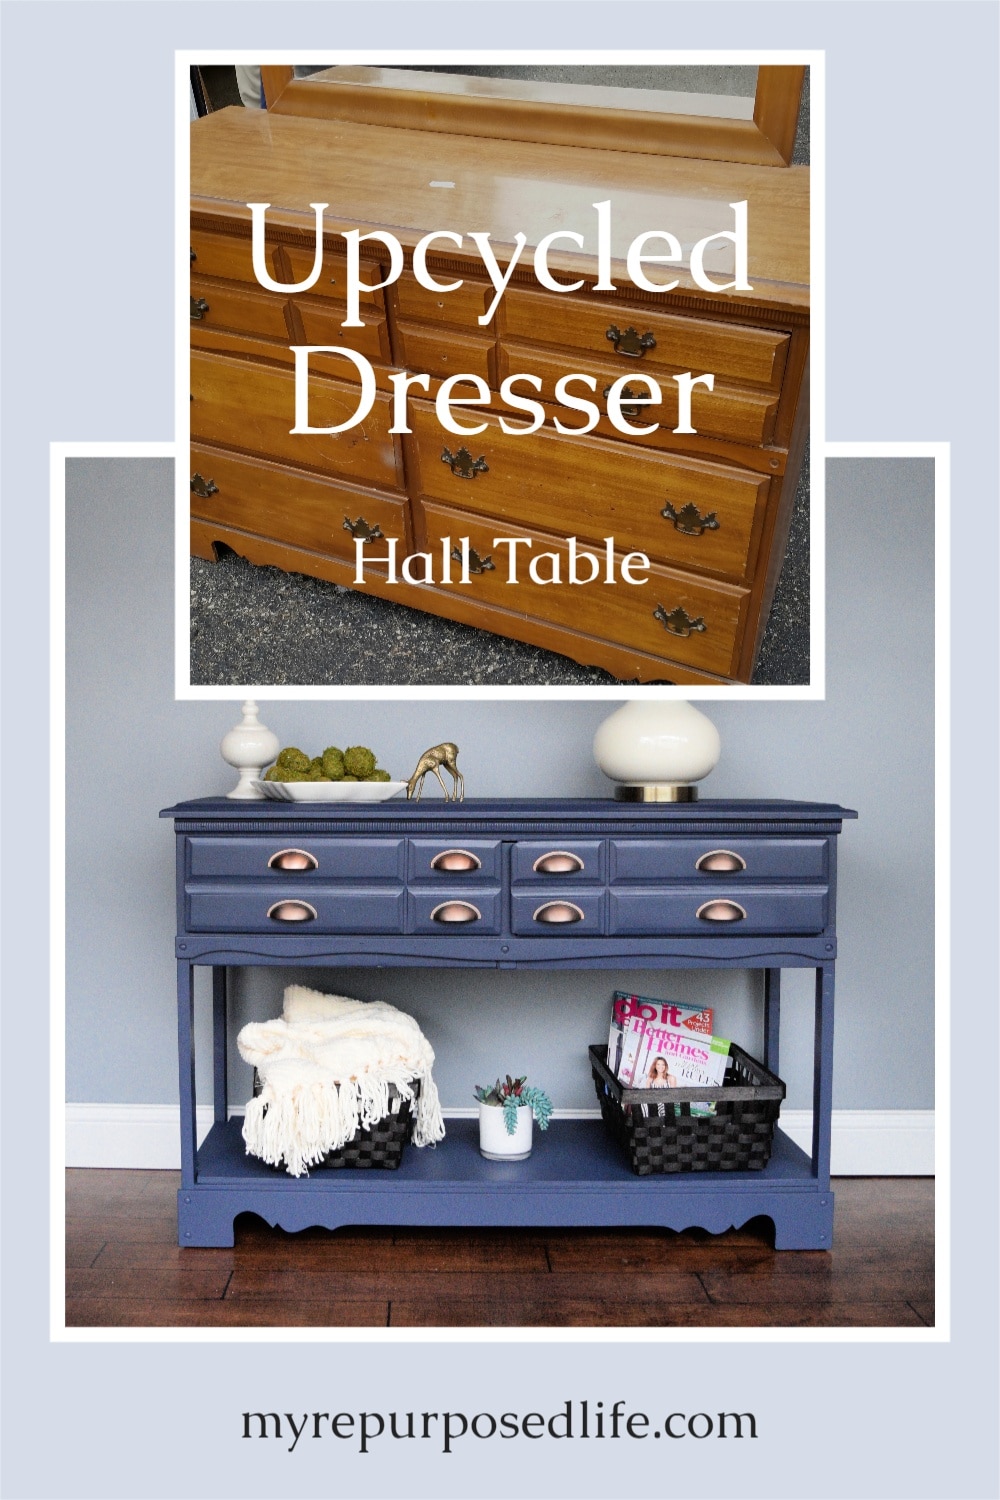 How to repurpose furniture by turning an old, unwanted dresser into a useful hall table or sofa table. Step by step directions make this a doable project! #myrepurposedlife #upcycle #dresser #halltable #DIY via @repurposedlife